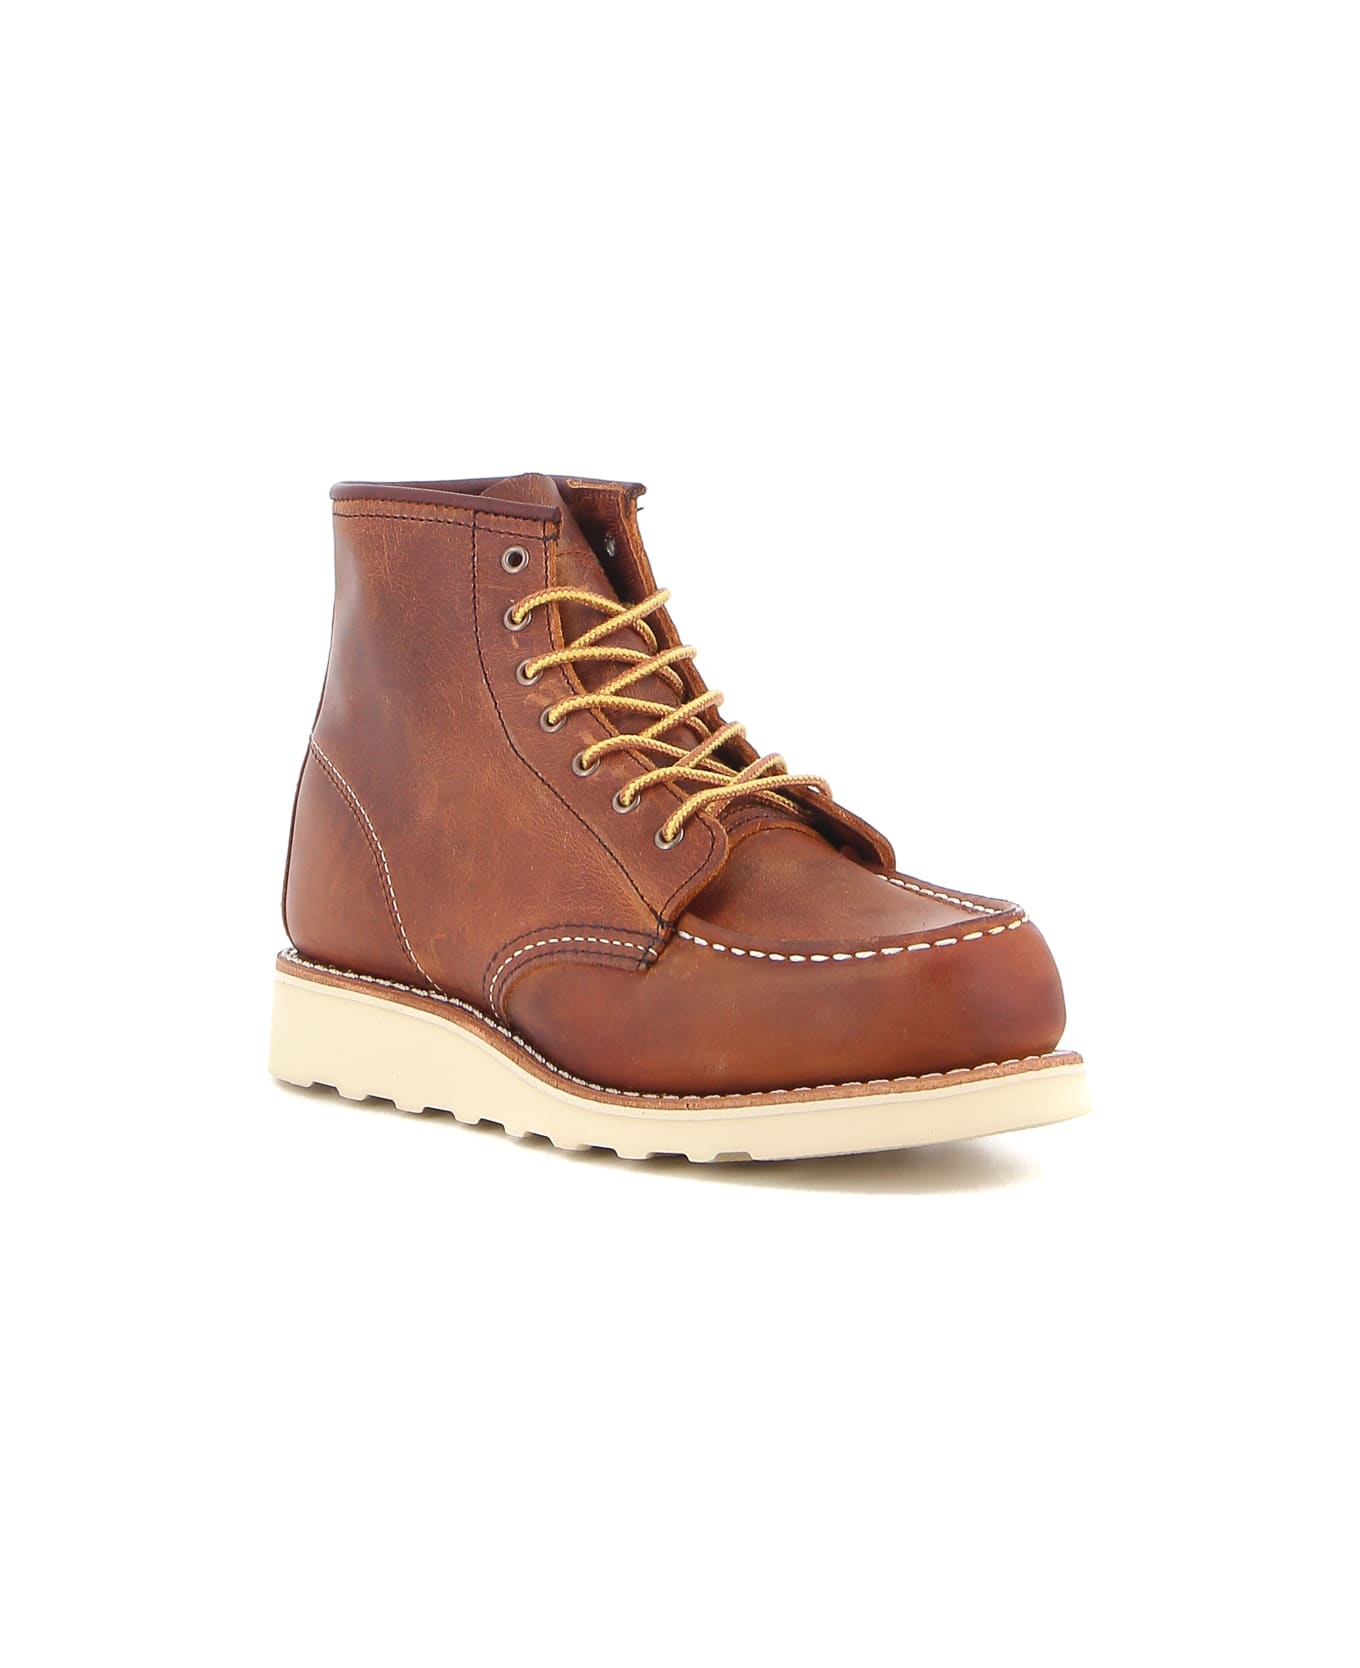 Red Wing 6 Inch Moc - Copper